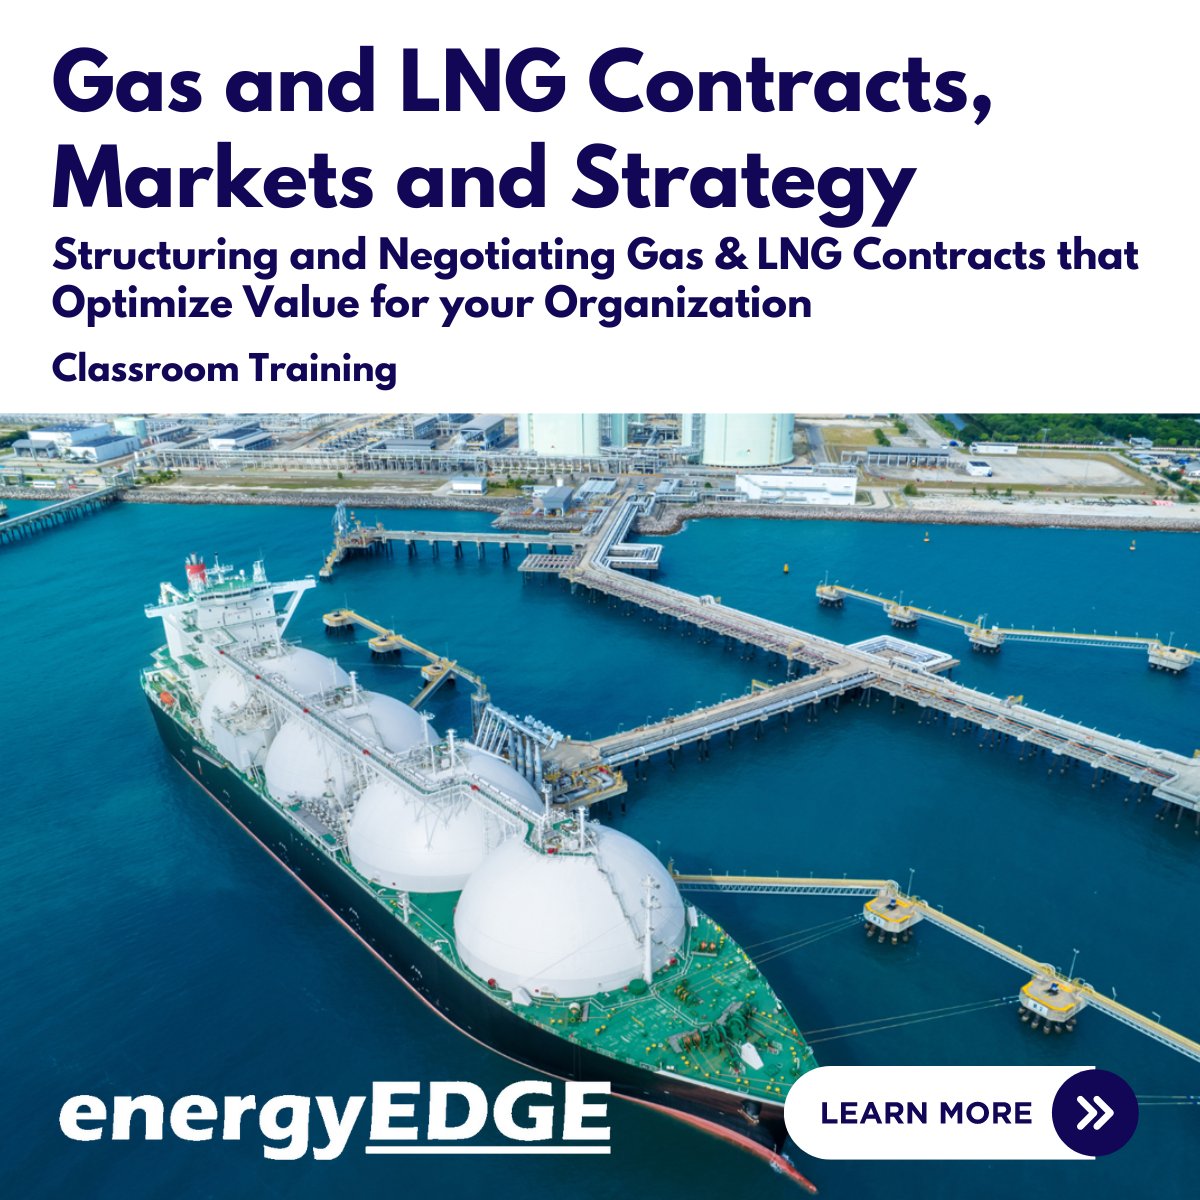 Gas and LNG Contracts, Markets and Strategy – Structuring and Negotiating Gas & LNG Contracts that Optimize Value for your Organization